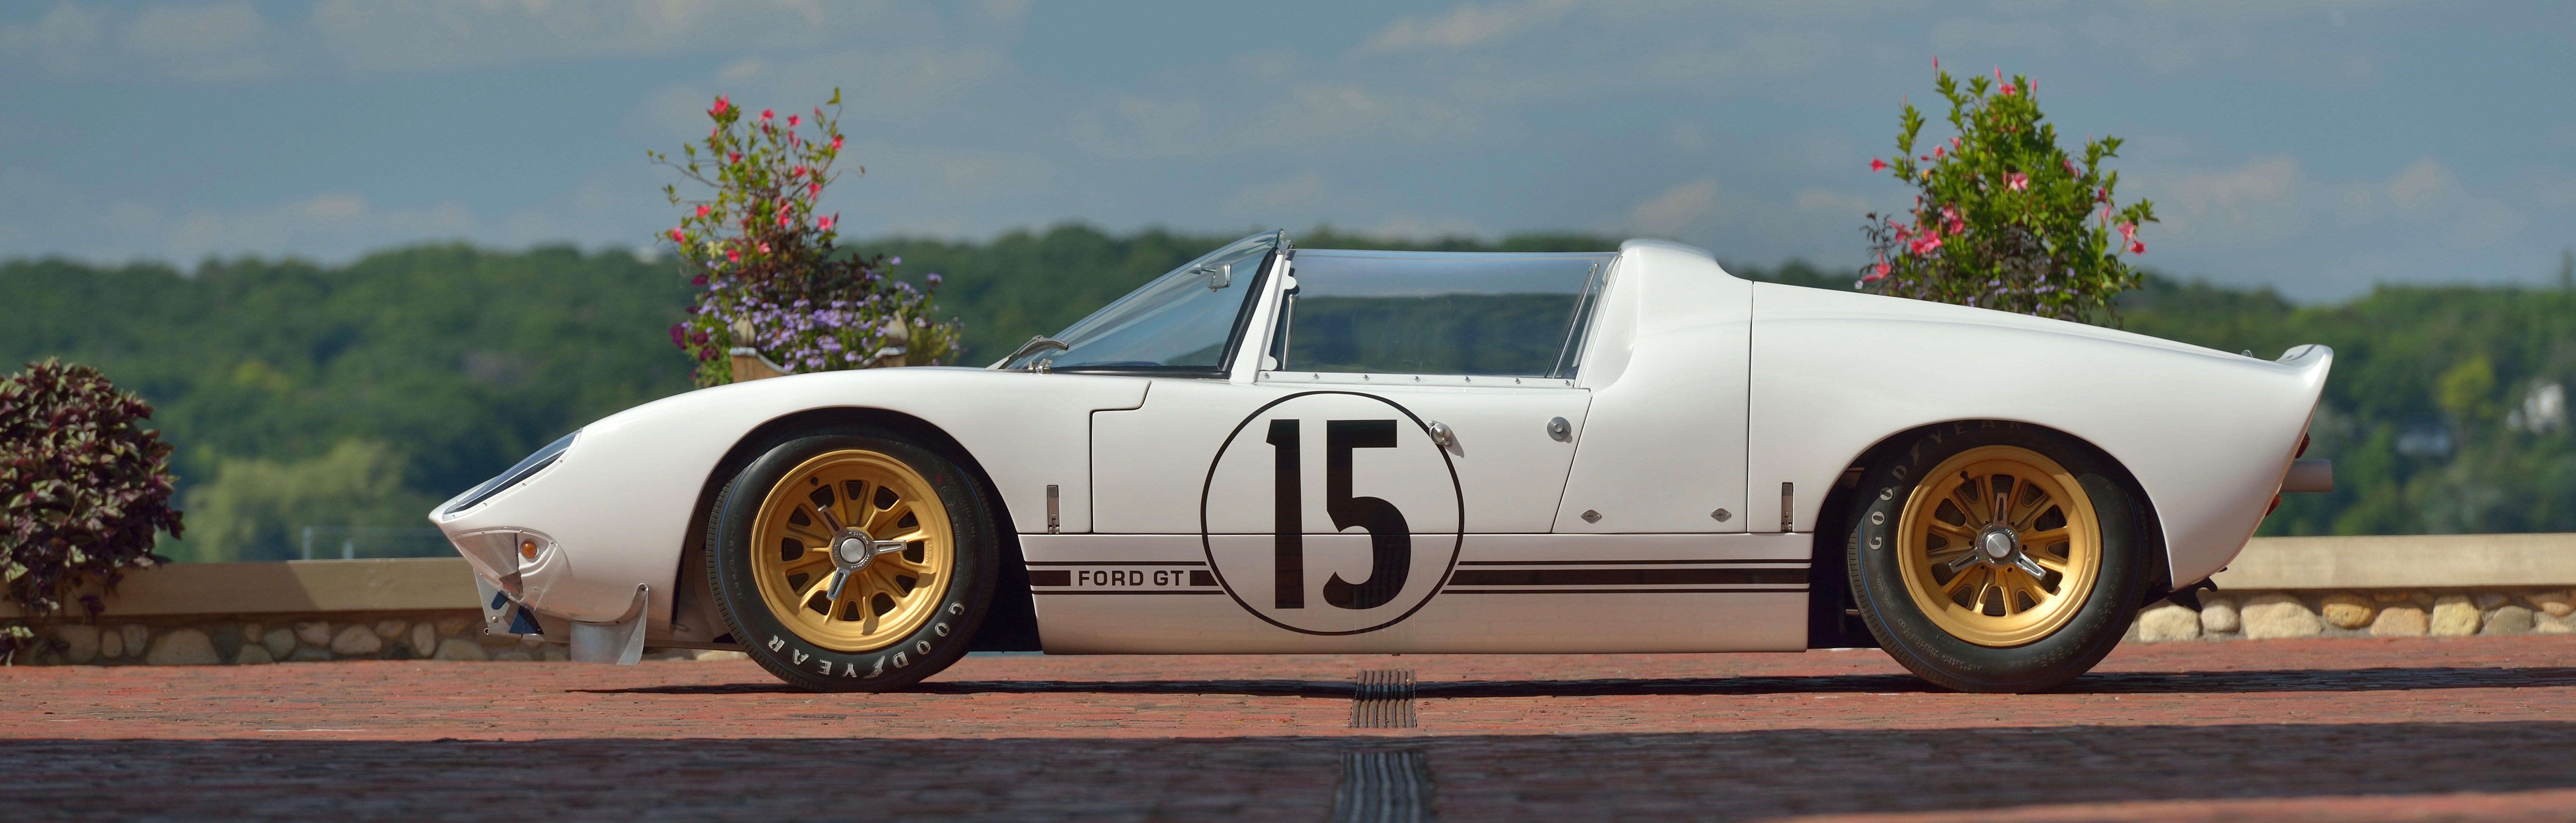 GT40, Only GT40 roadster to race at Le Mans goes on Kissimmee docket, ClassicCars.com Journal